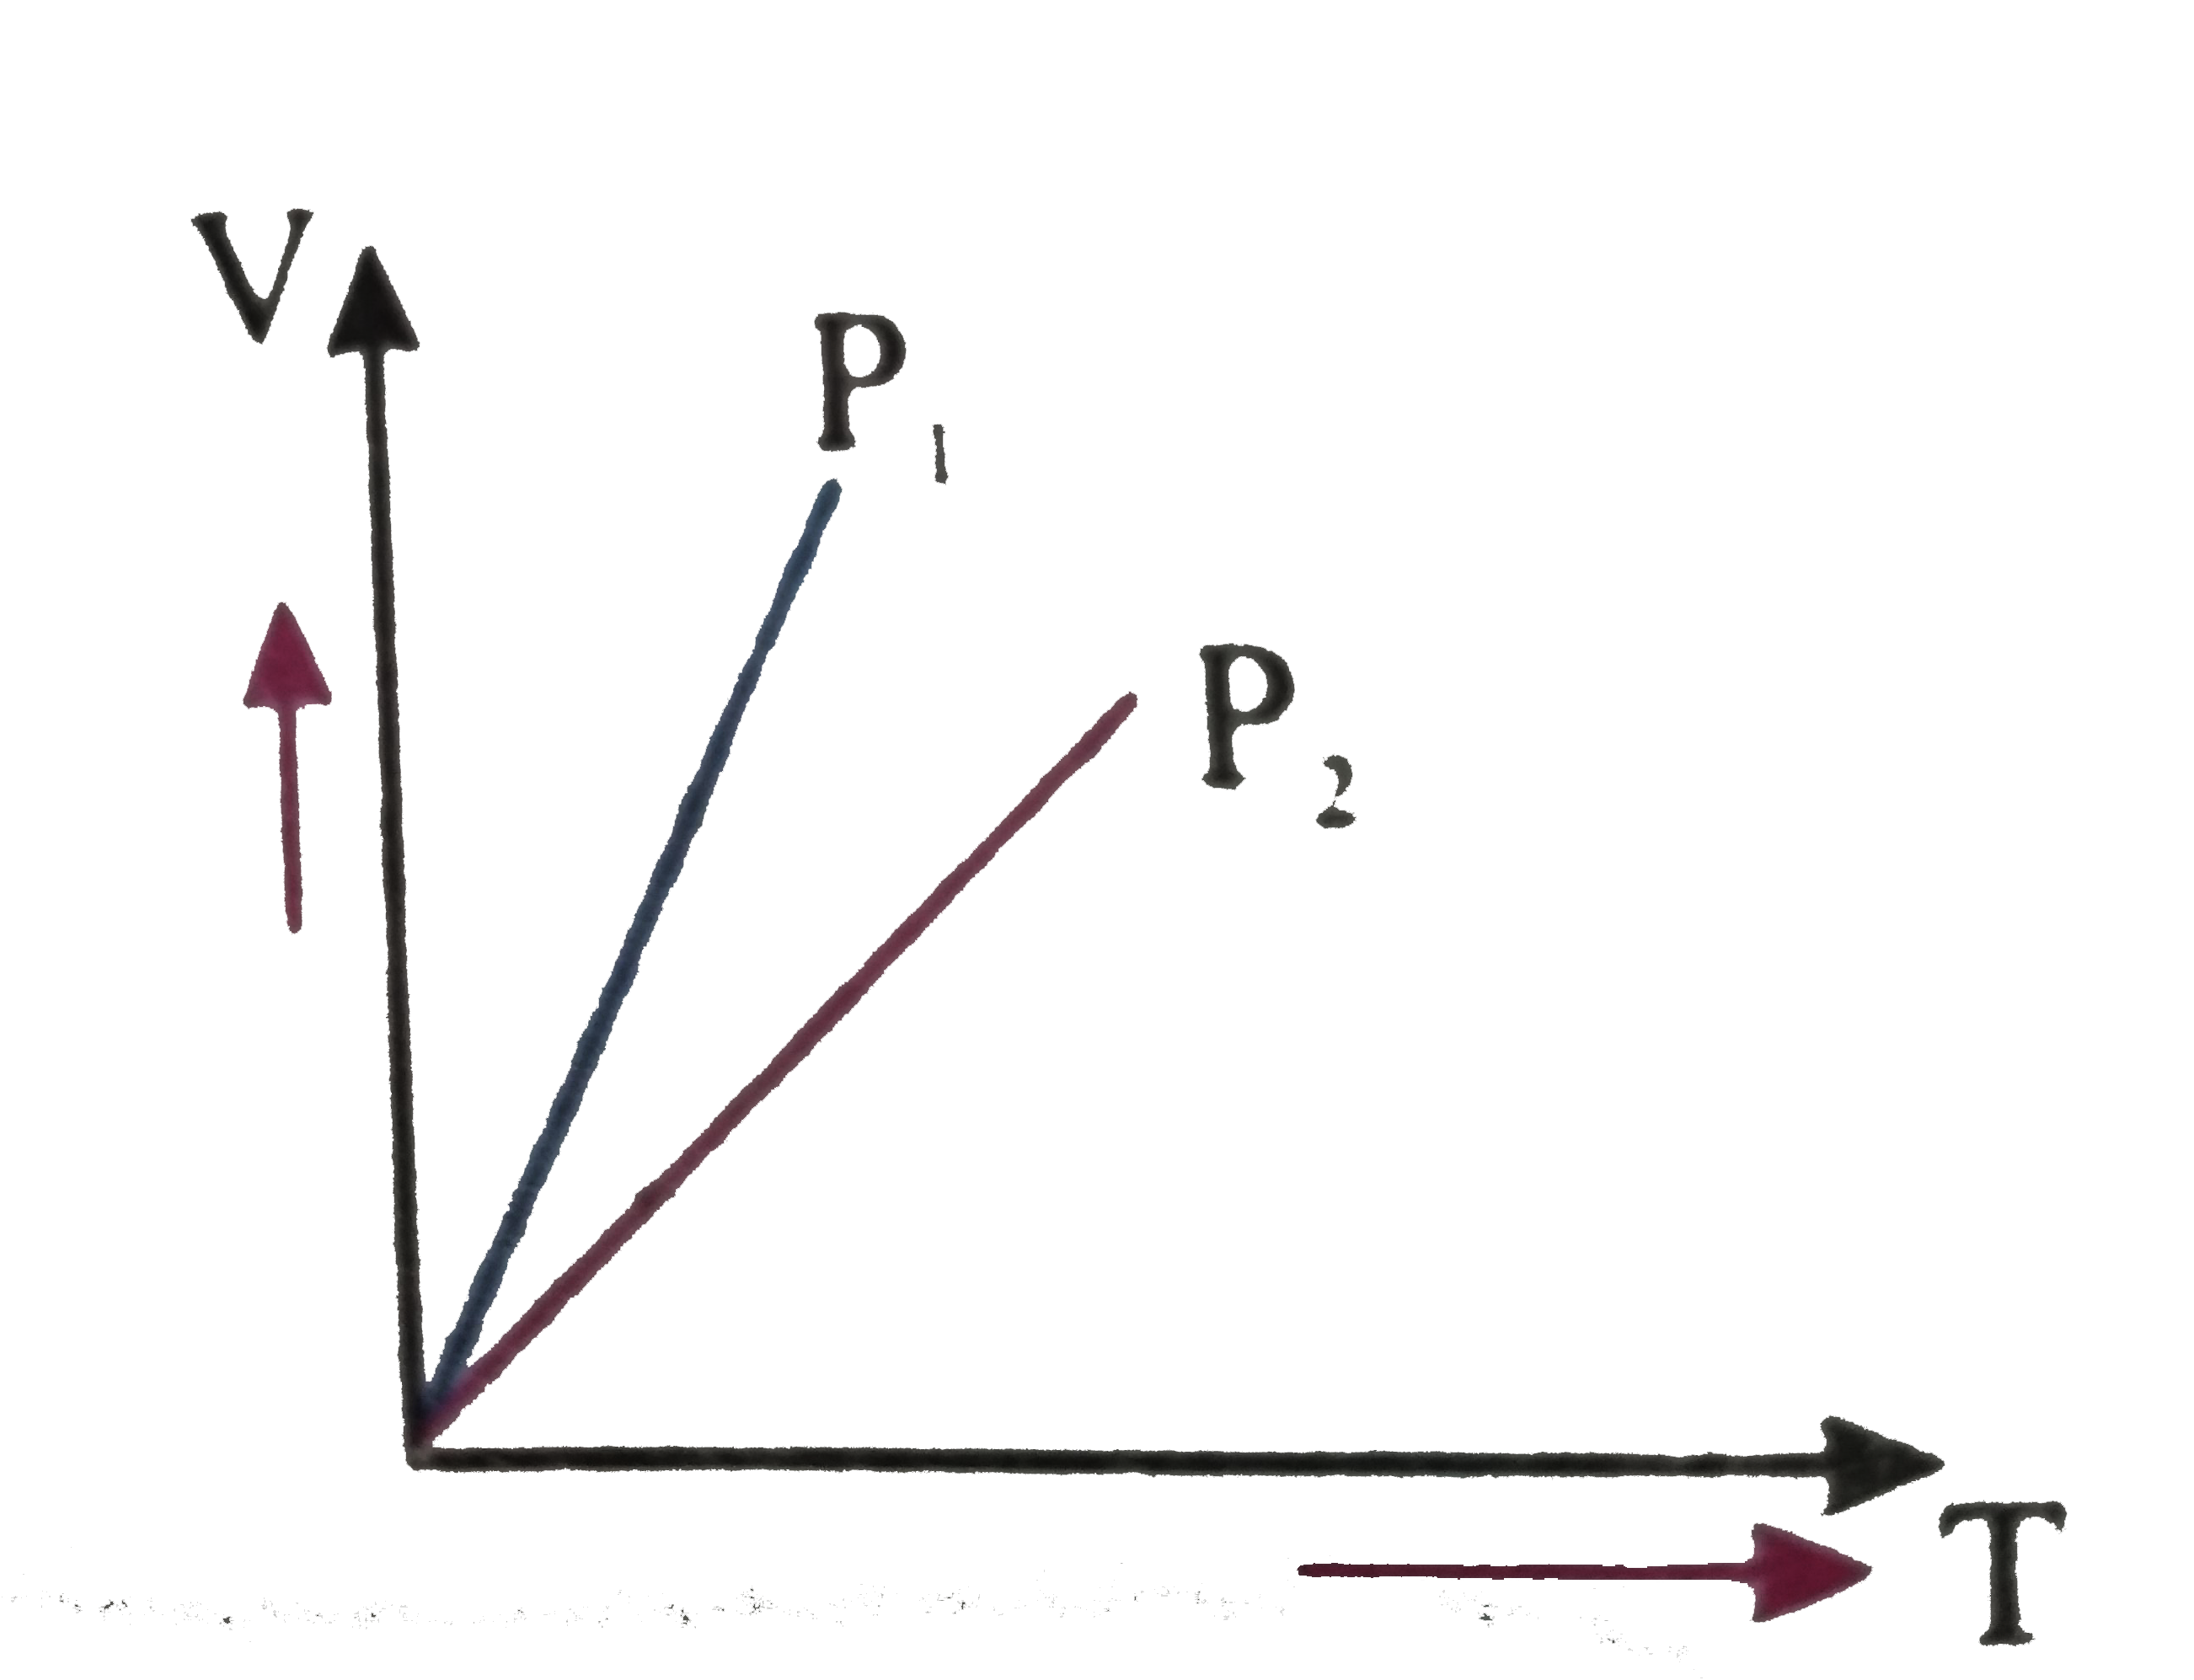 For an ideal gas V - T curves at constant pressure P(1) & P(2) are shown in figure, from the figure